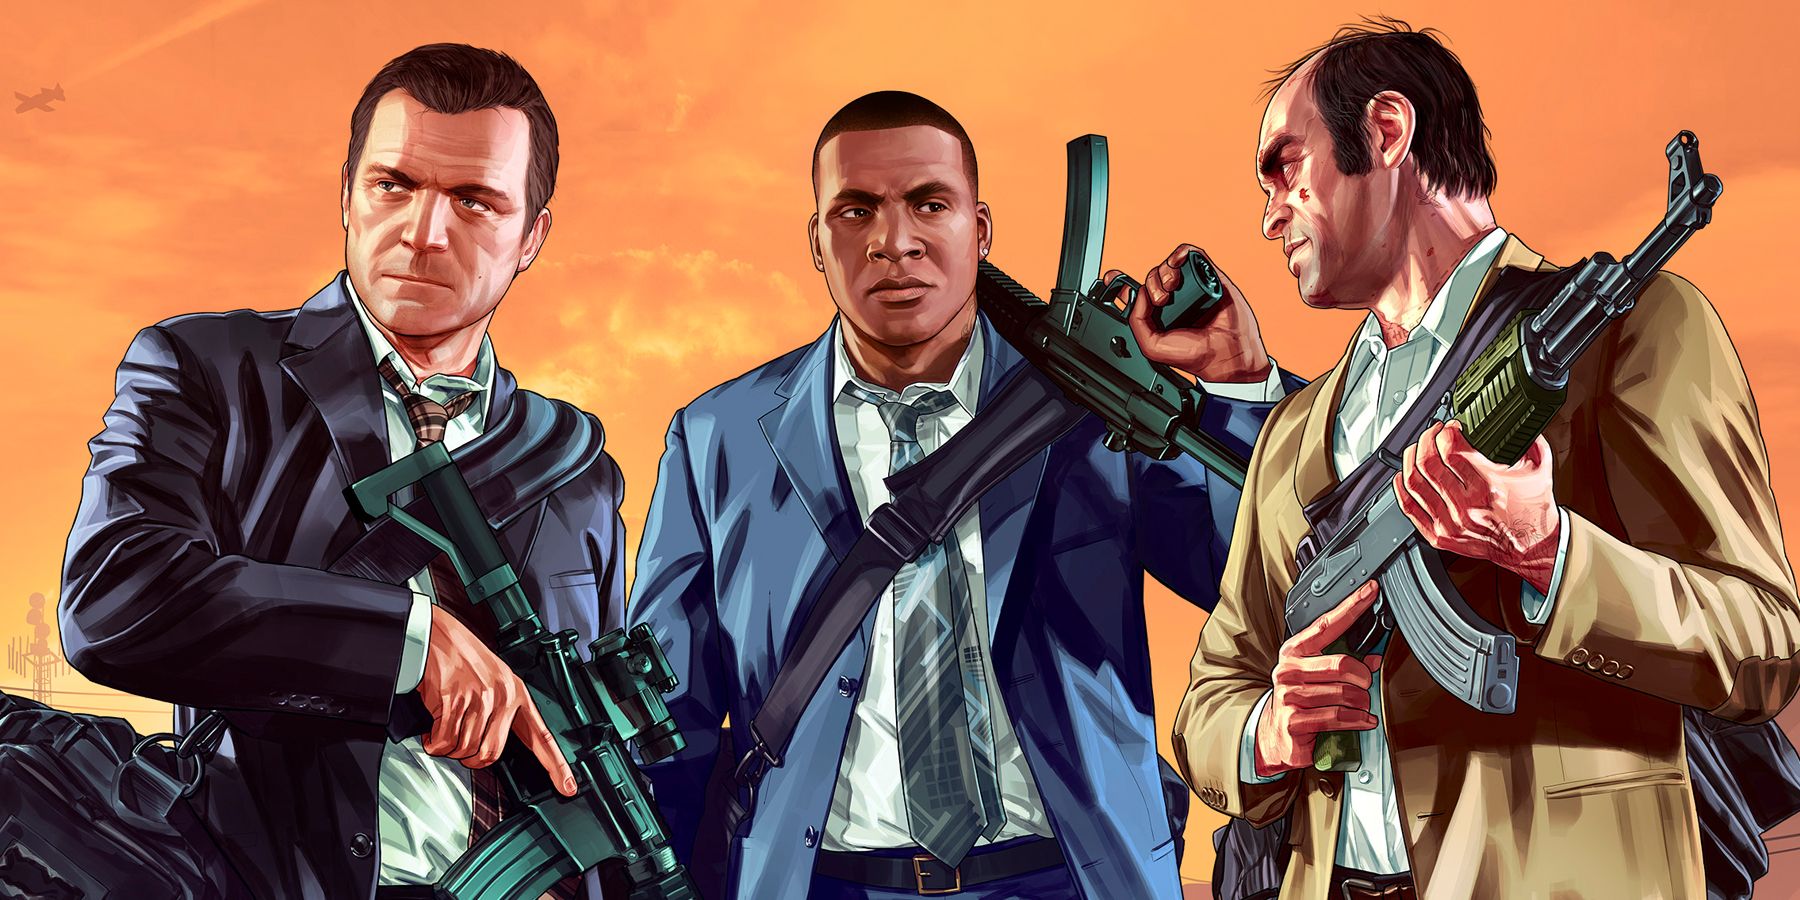 Image showing Micheal, Trevor and Franklin.